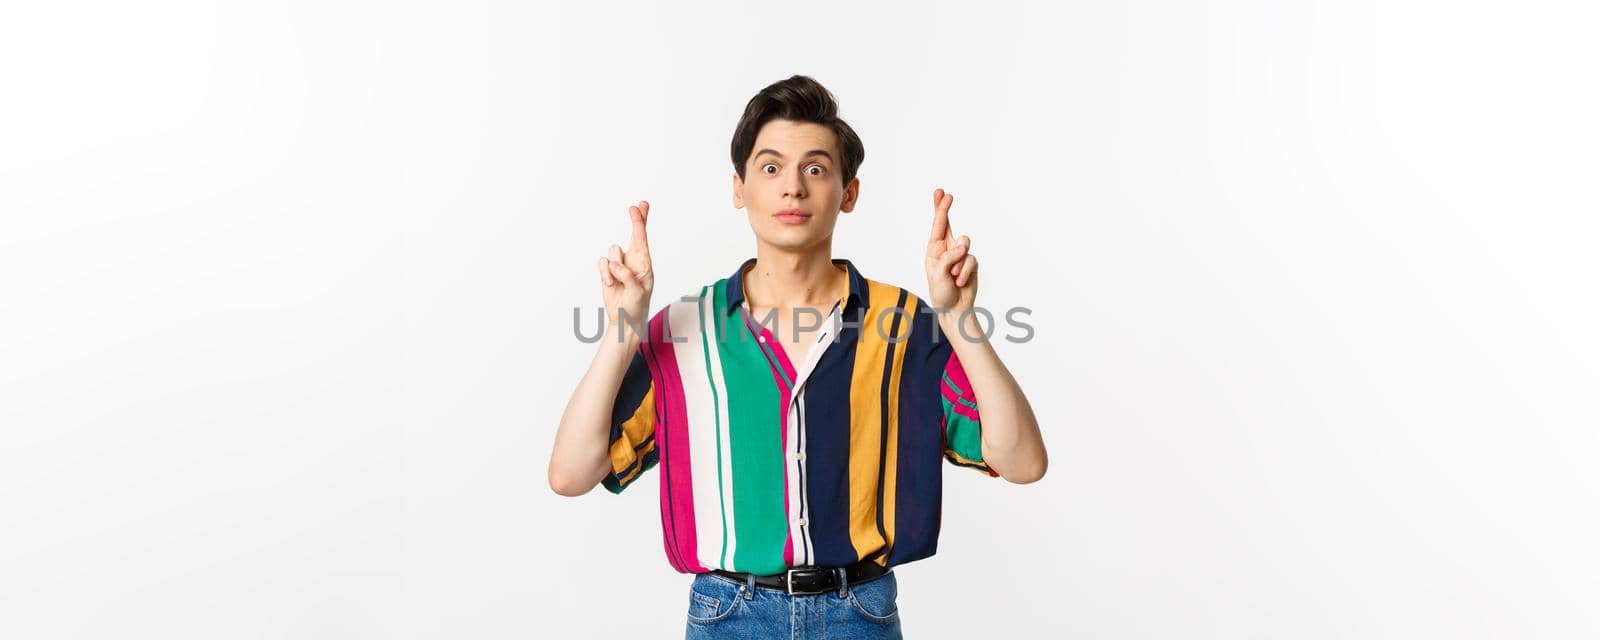 Hopeful young androgynous man cross fingers for good luck, making wish, waiting for something, standing over white background.